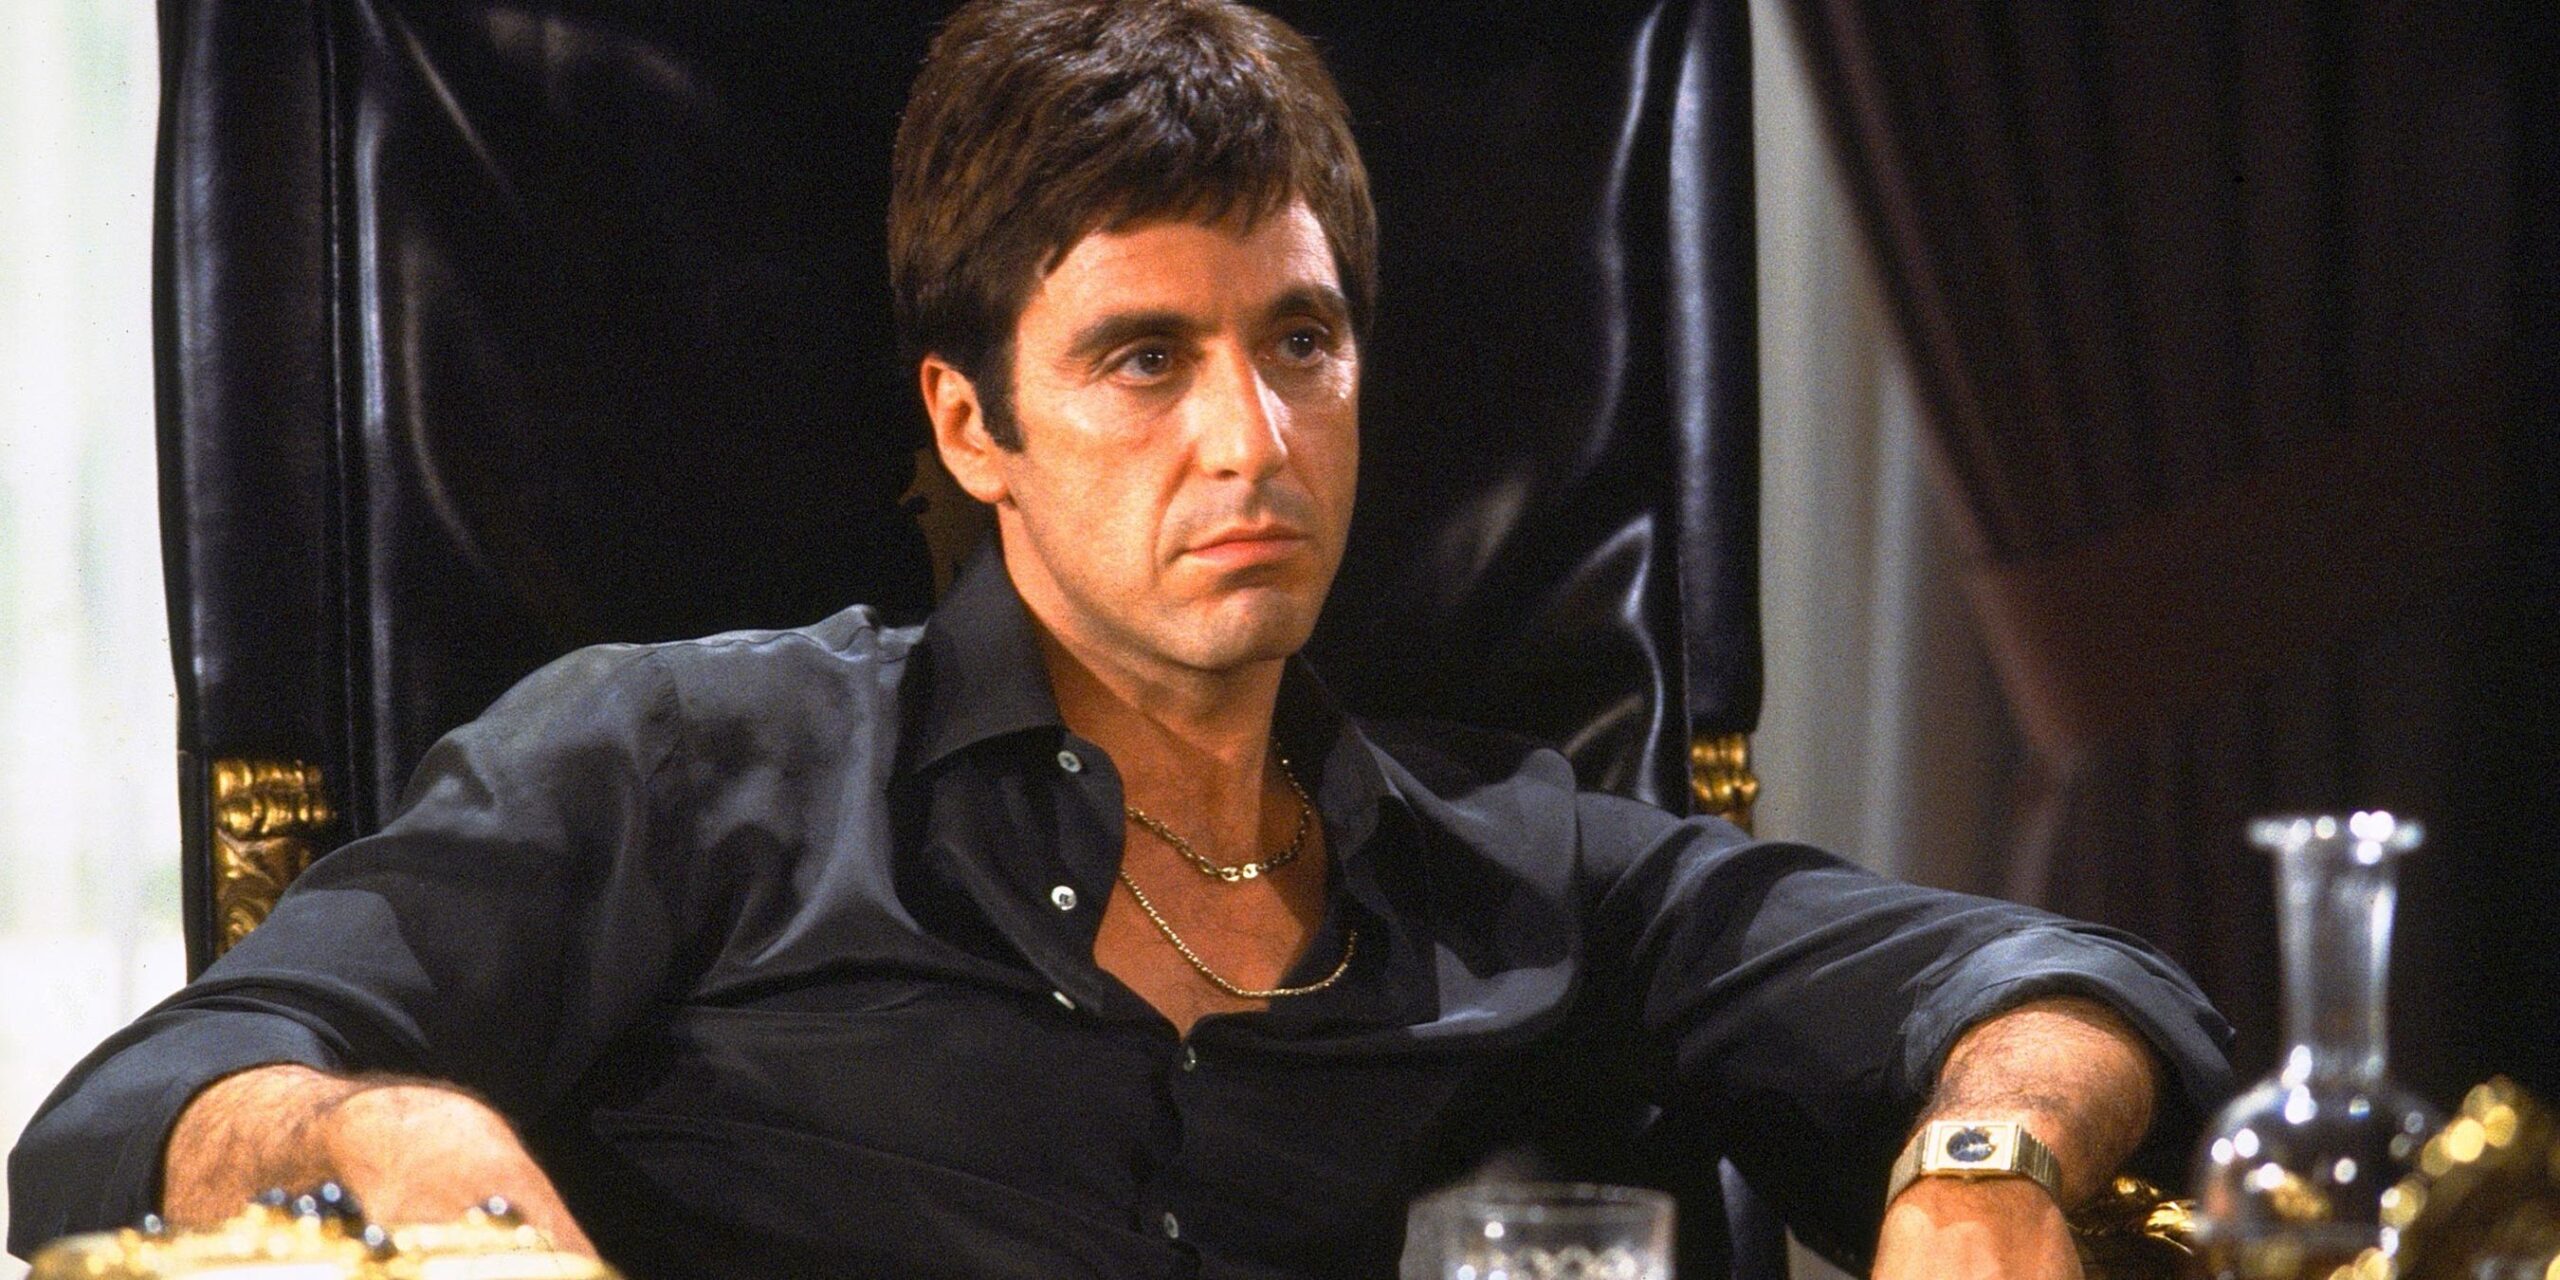 Scarface Movie Remake Will Be Shocking & R-Rated, Says Director